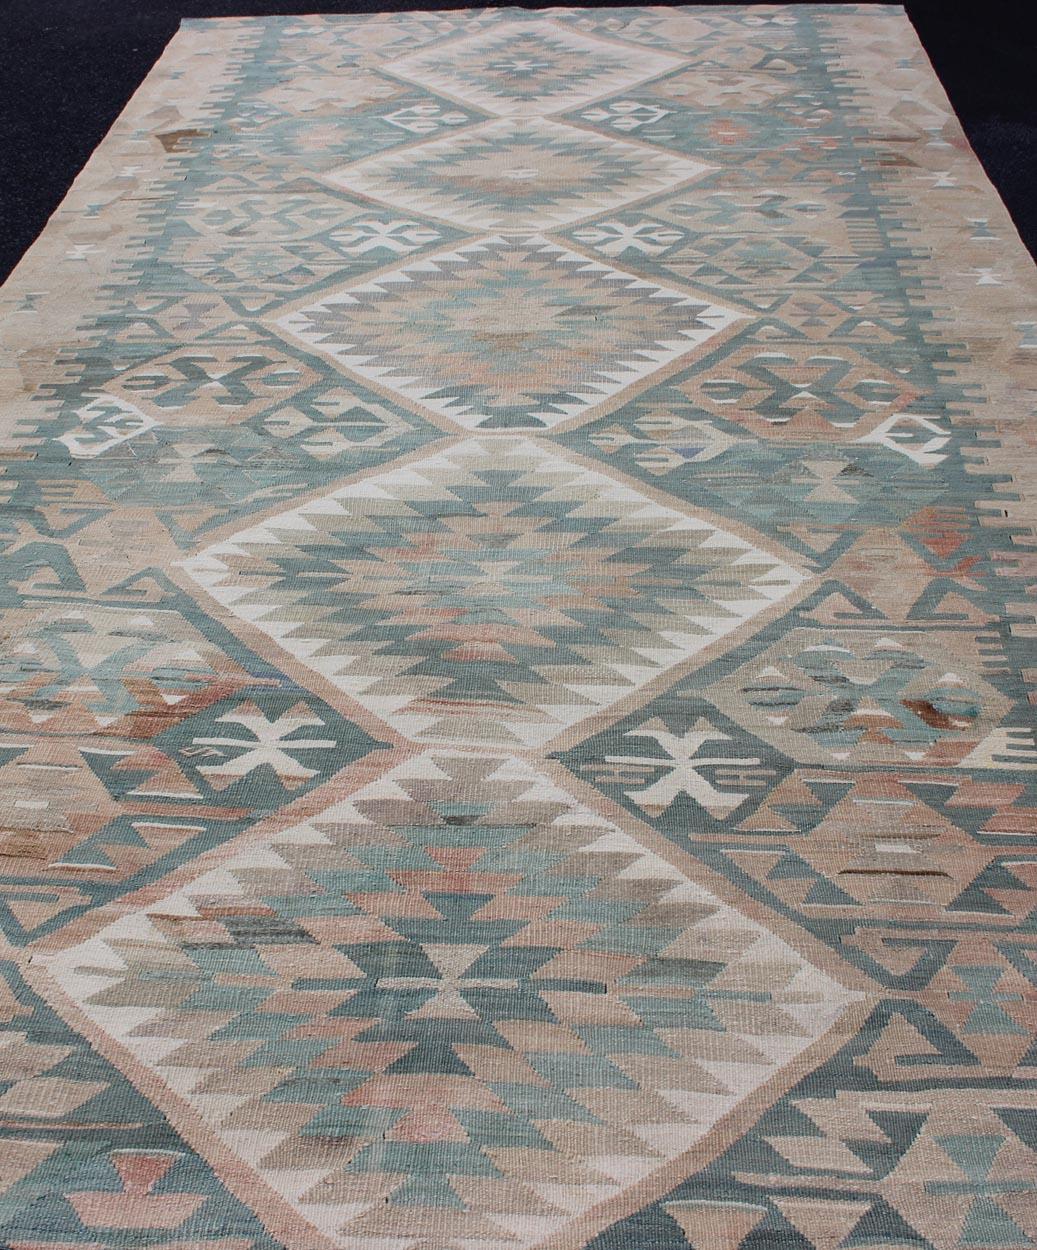 20th Century Geometric Design Vintage Turkish Tribal Flat-Weave Rug in Teal and Neutrals For Sale